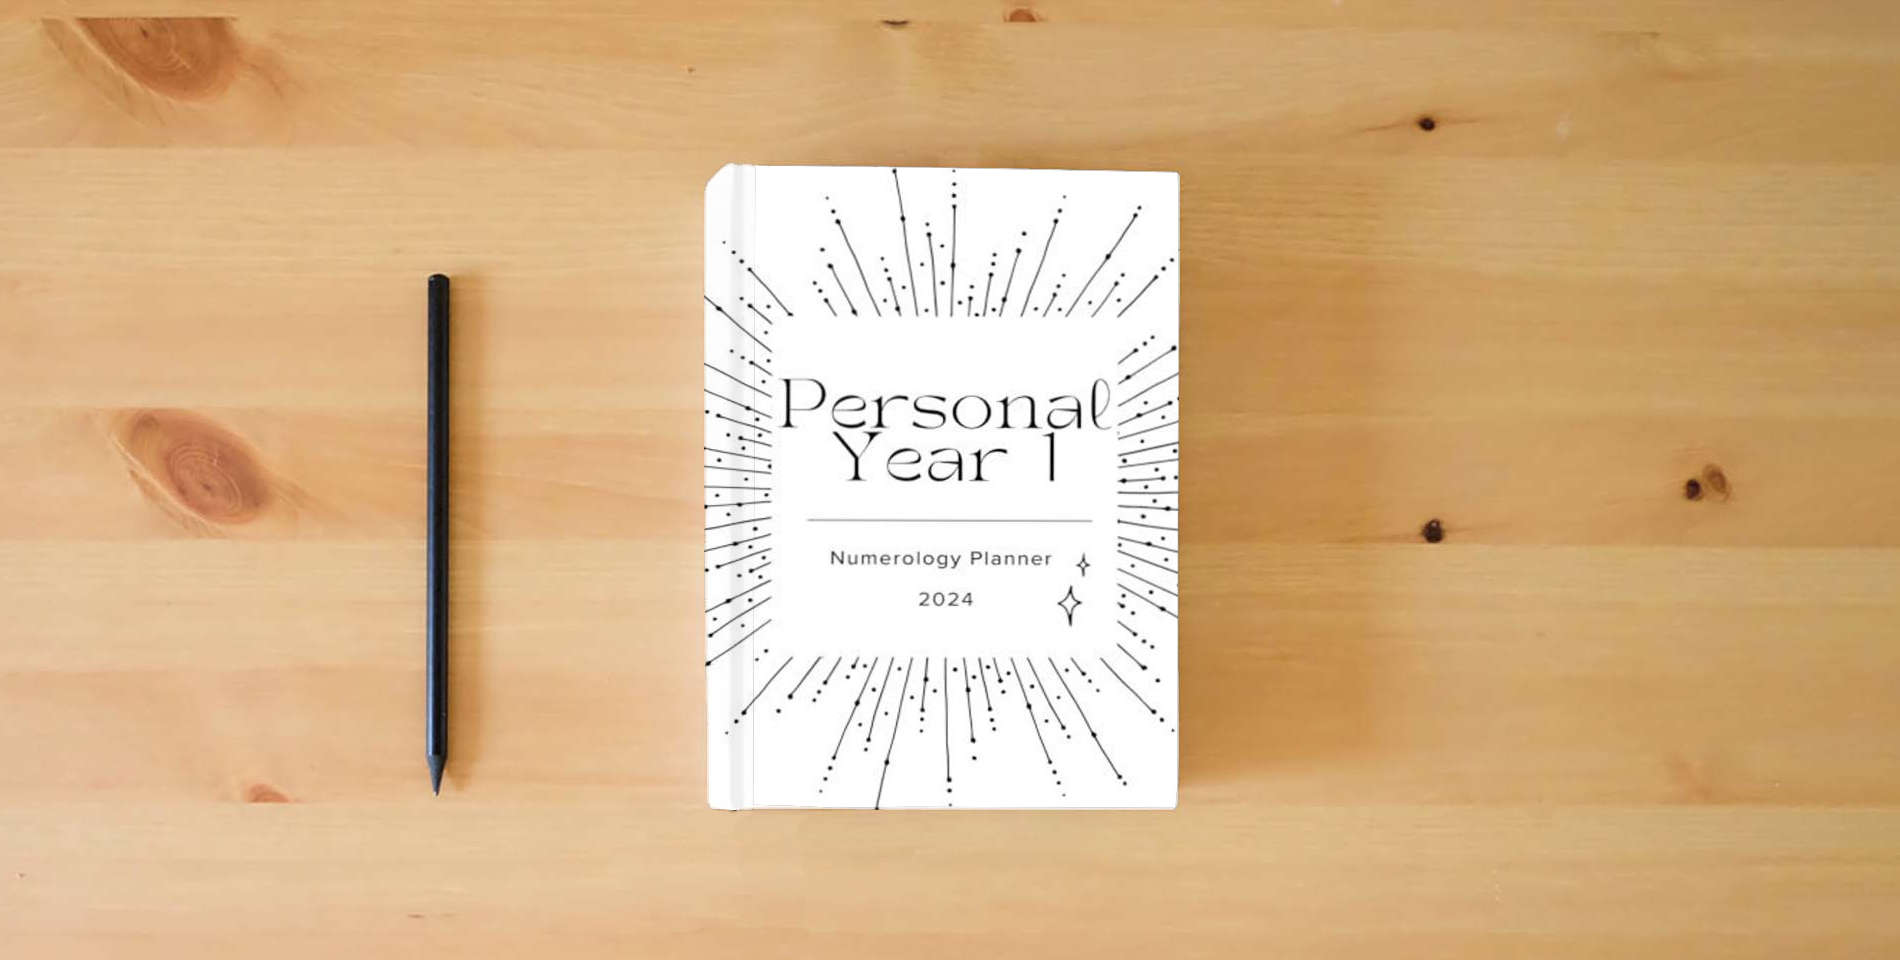 Numerology Planner 2024 Personal Year Table 